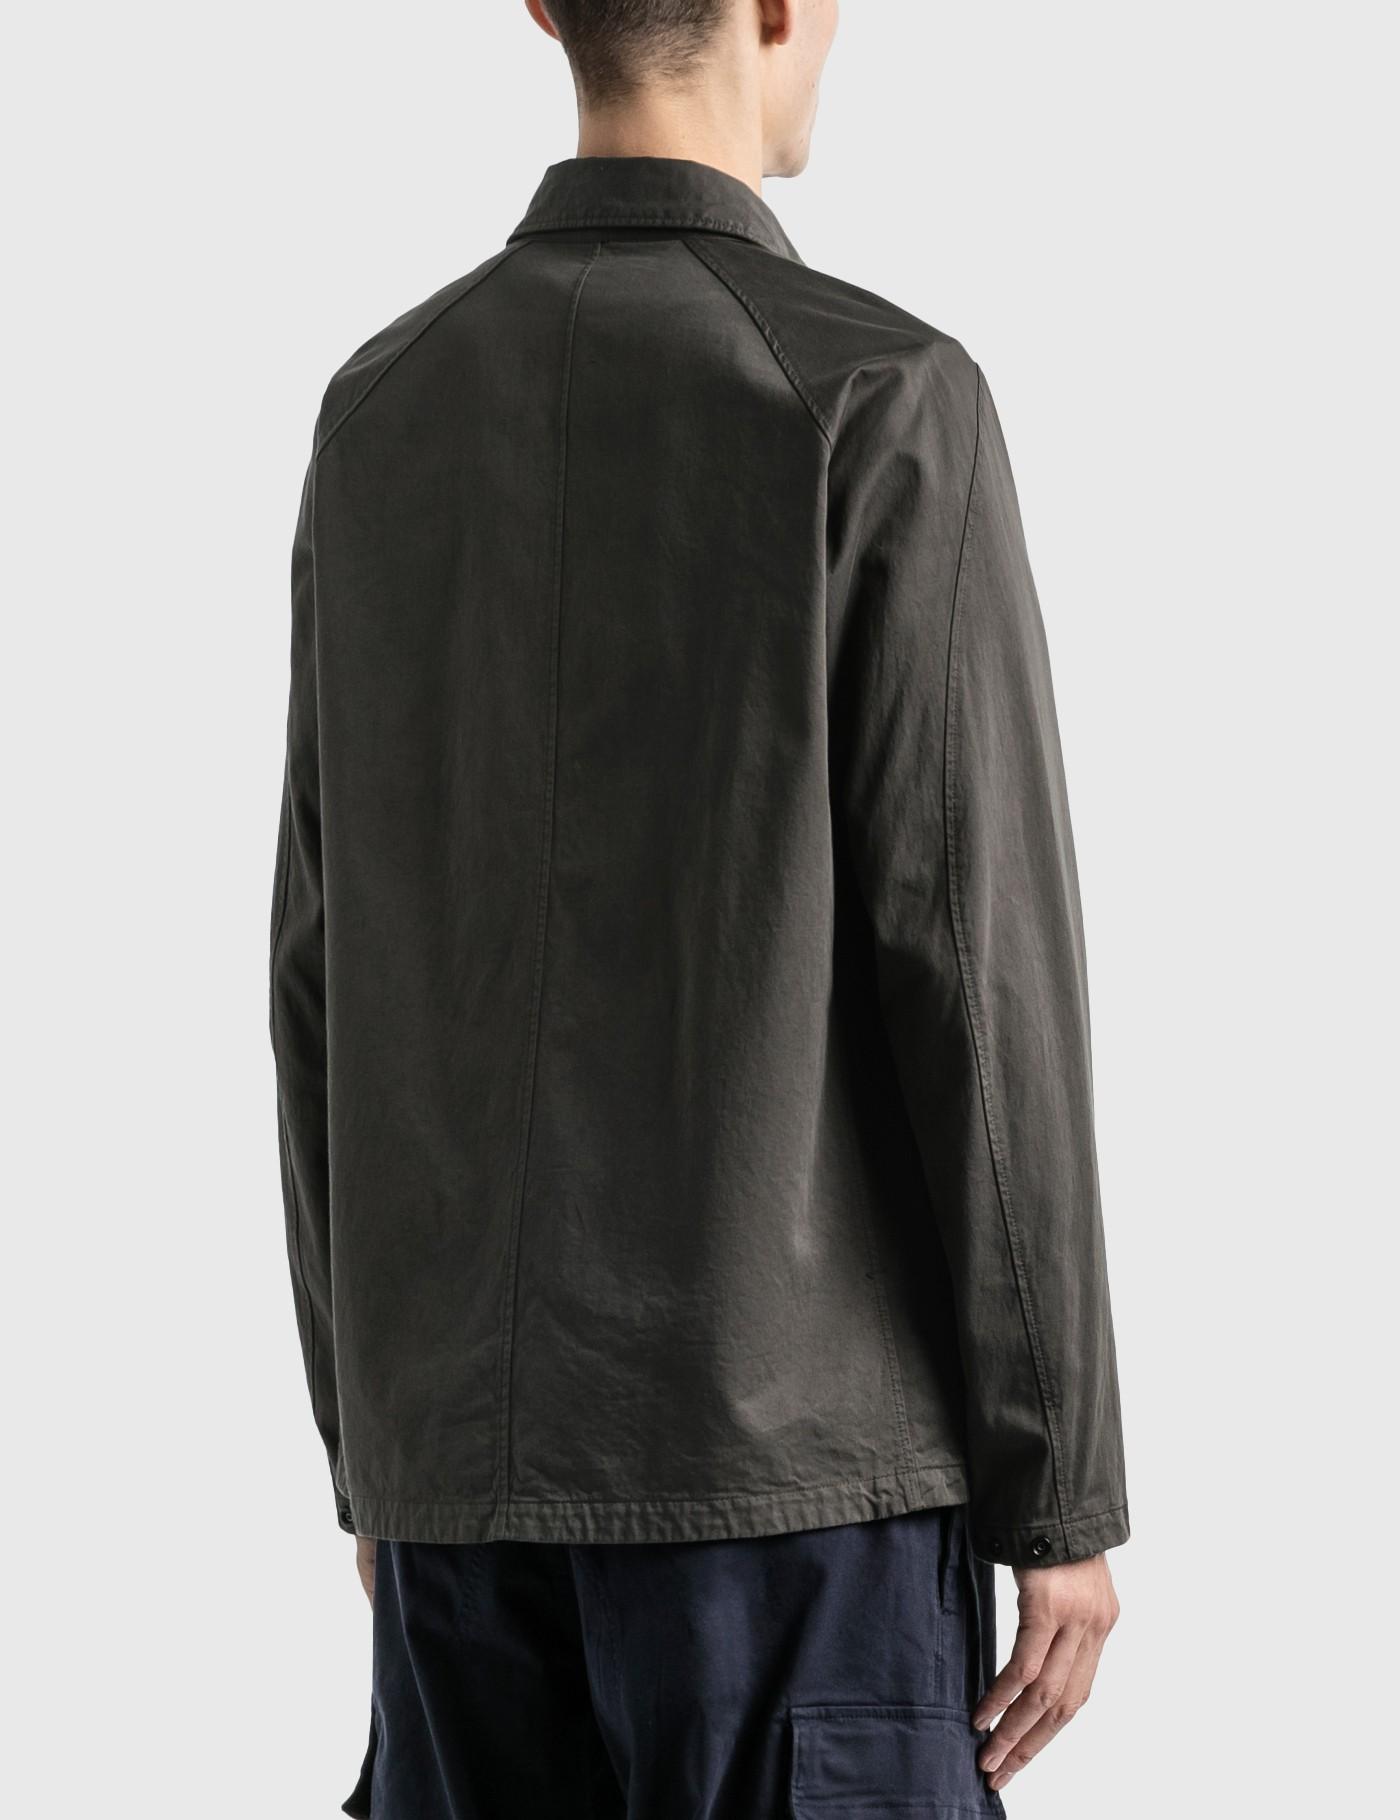 Stone Island Ghost Piece Overshirt in Black for Men - Lyst